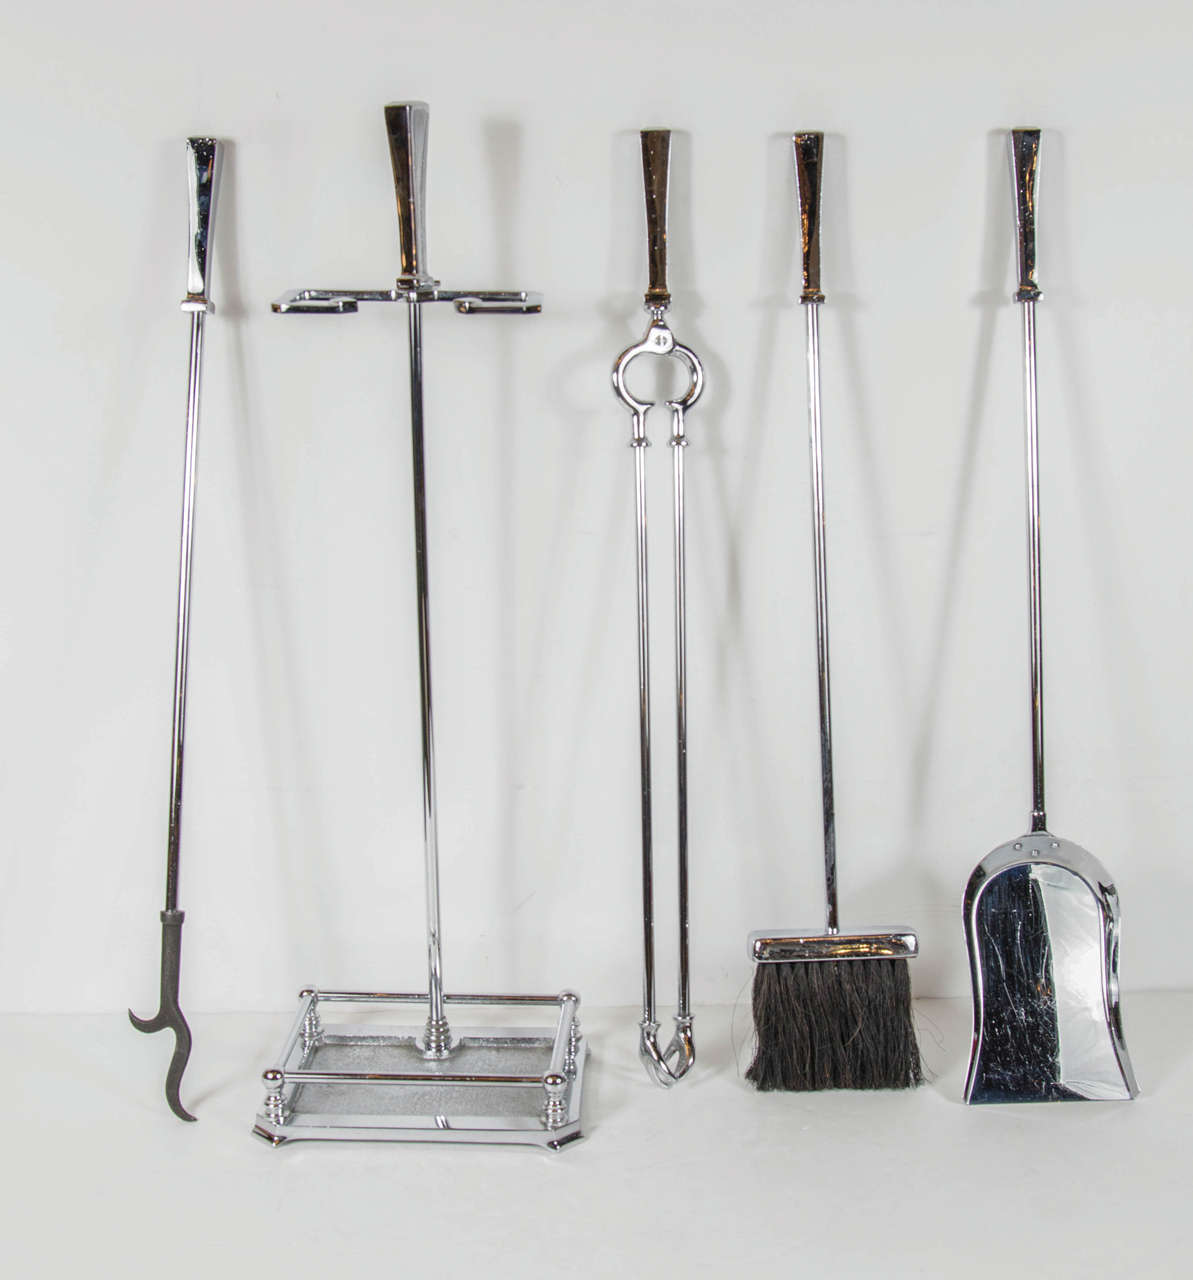 This very sophisticated Mid-Century Modernist Fire tool set features an all chrome design with elegant stylized, and tapered geometric handles. The set  includes a shovel, log holder, poker, brush and stand.